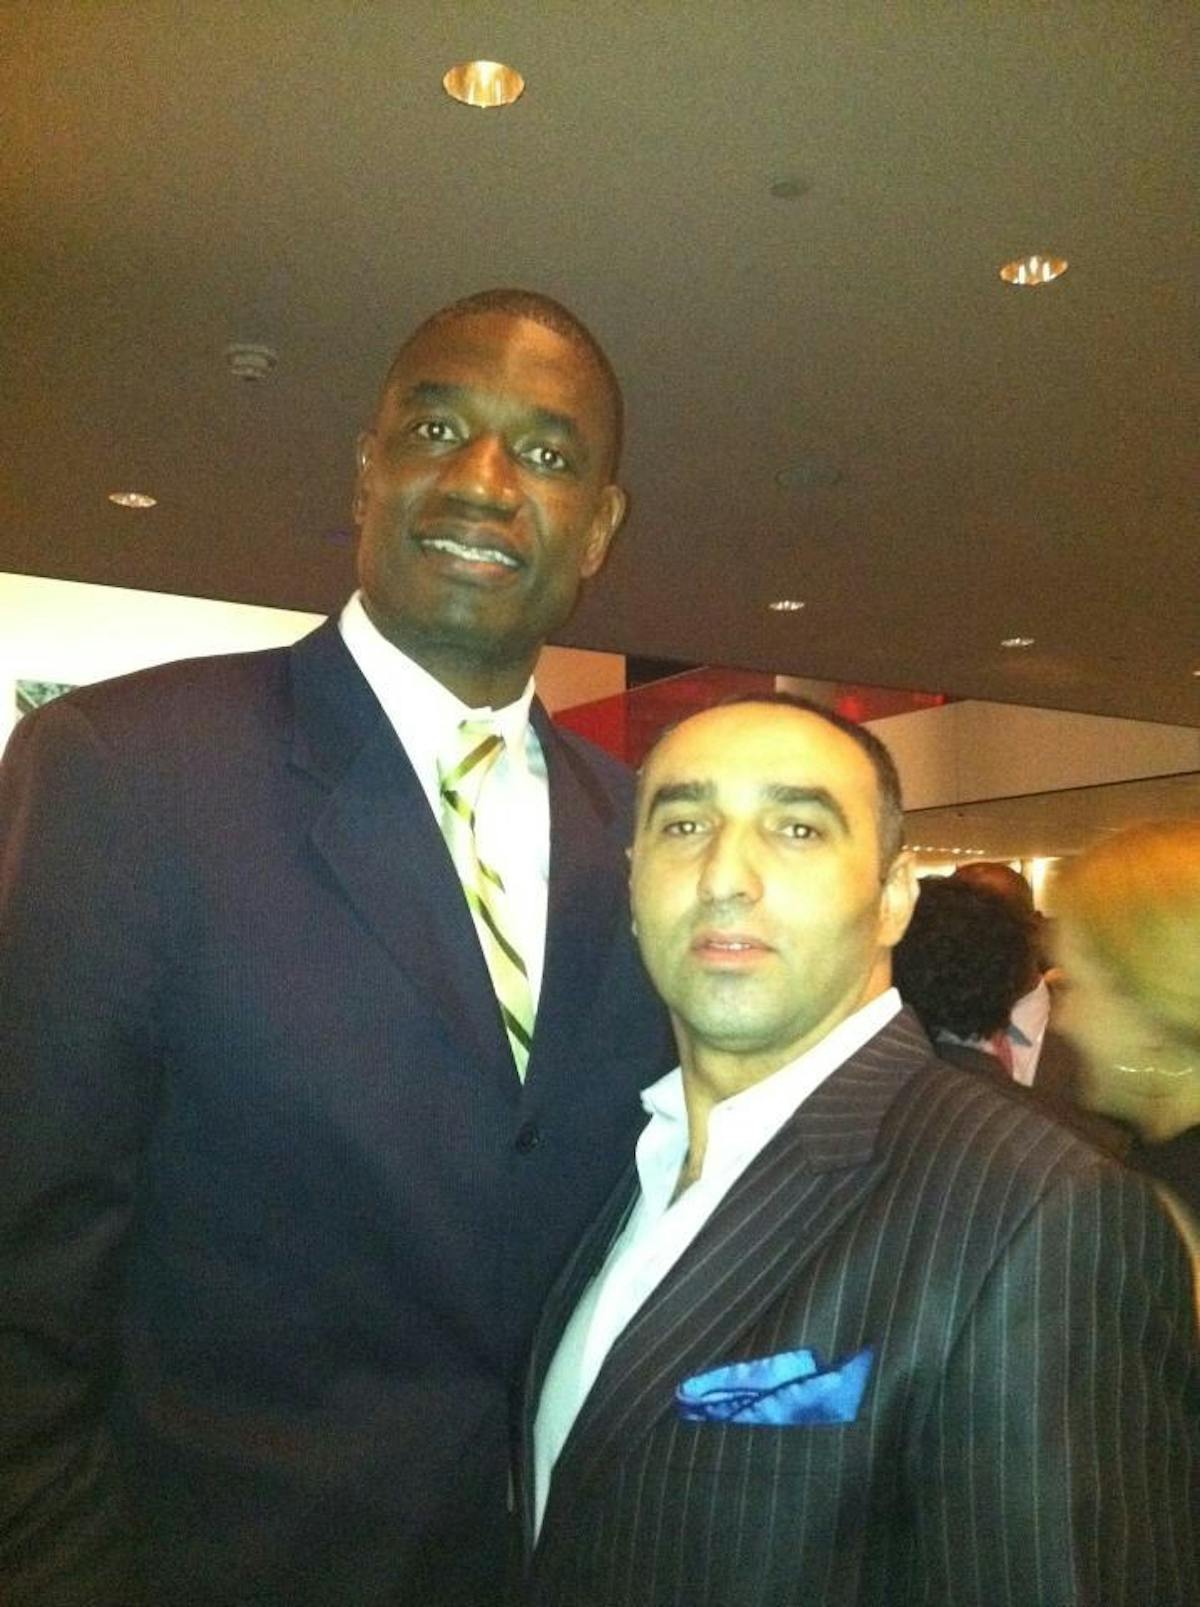 Dikembe Mutombo wearing a suit and tie